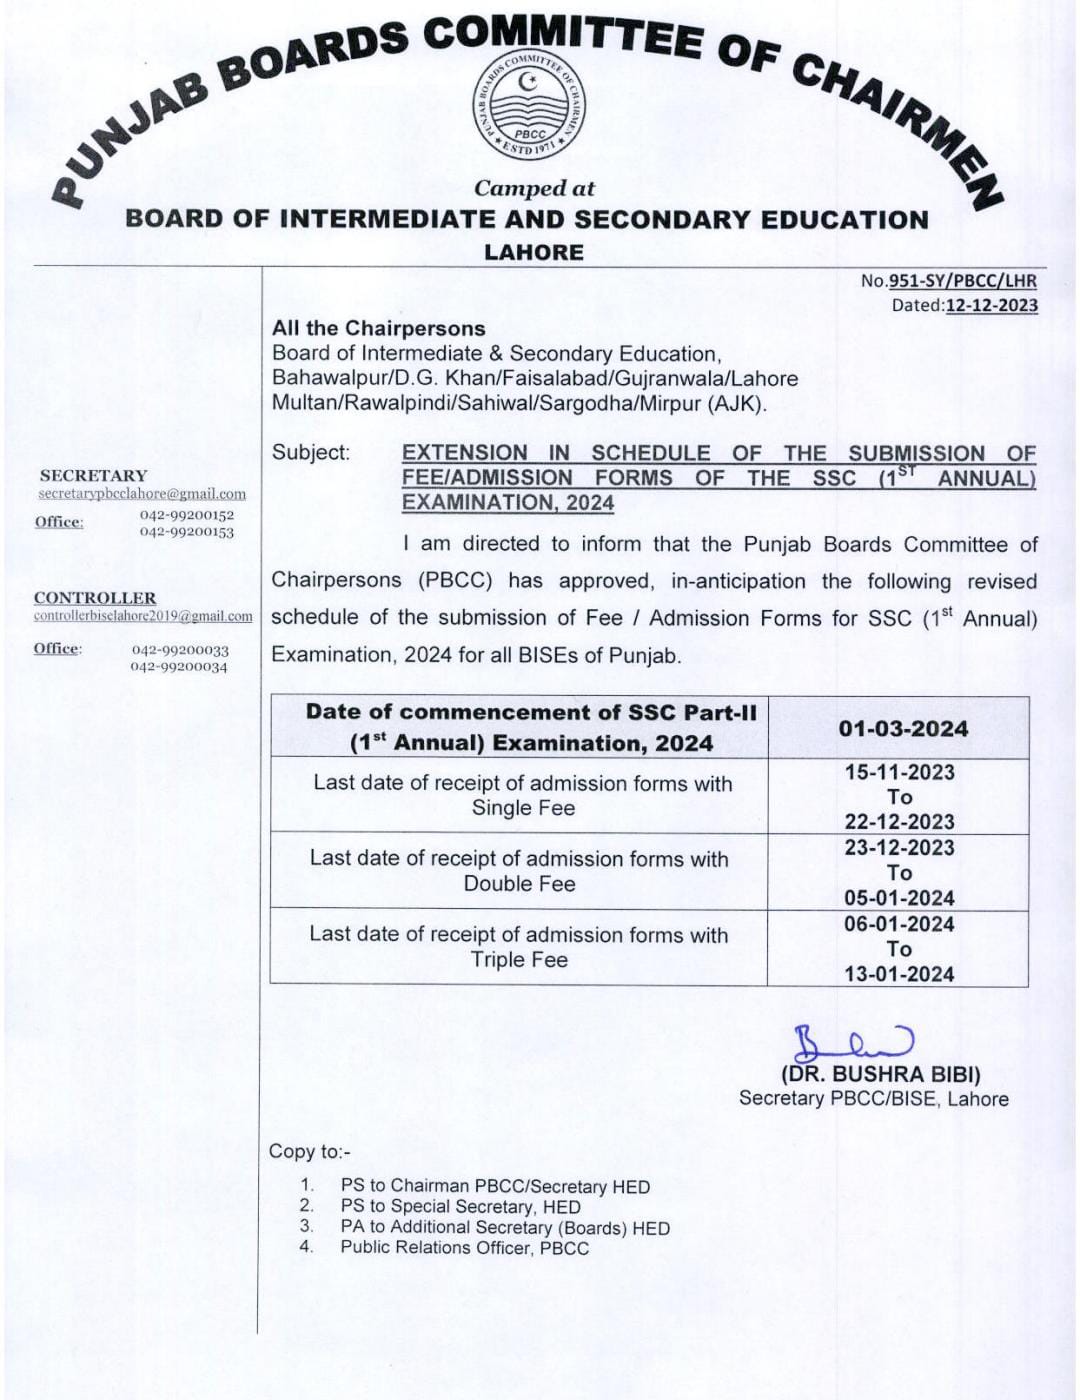 Extension Schedule Submission Fee Admission Forms of SSC 1st Annual Examination 2024 Punjab All Board